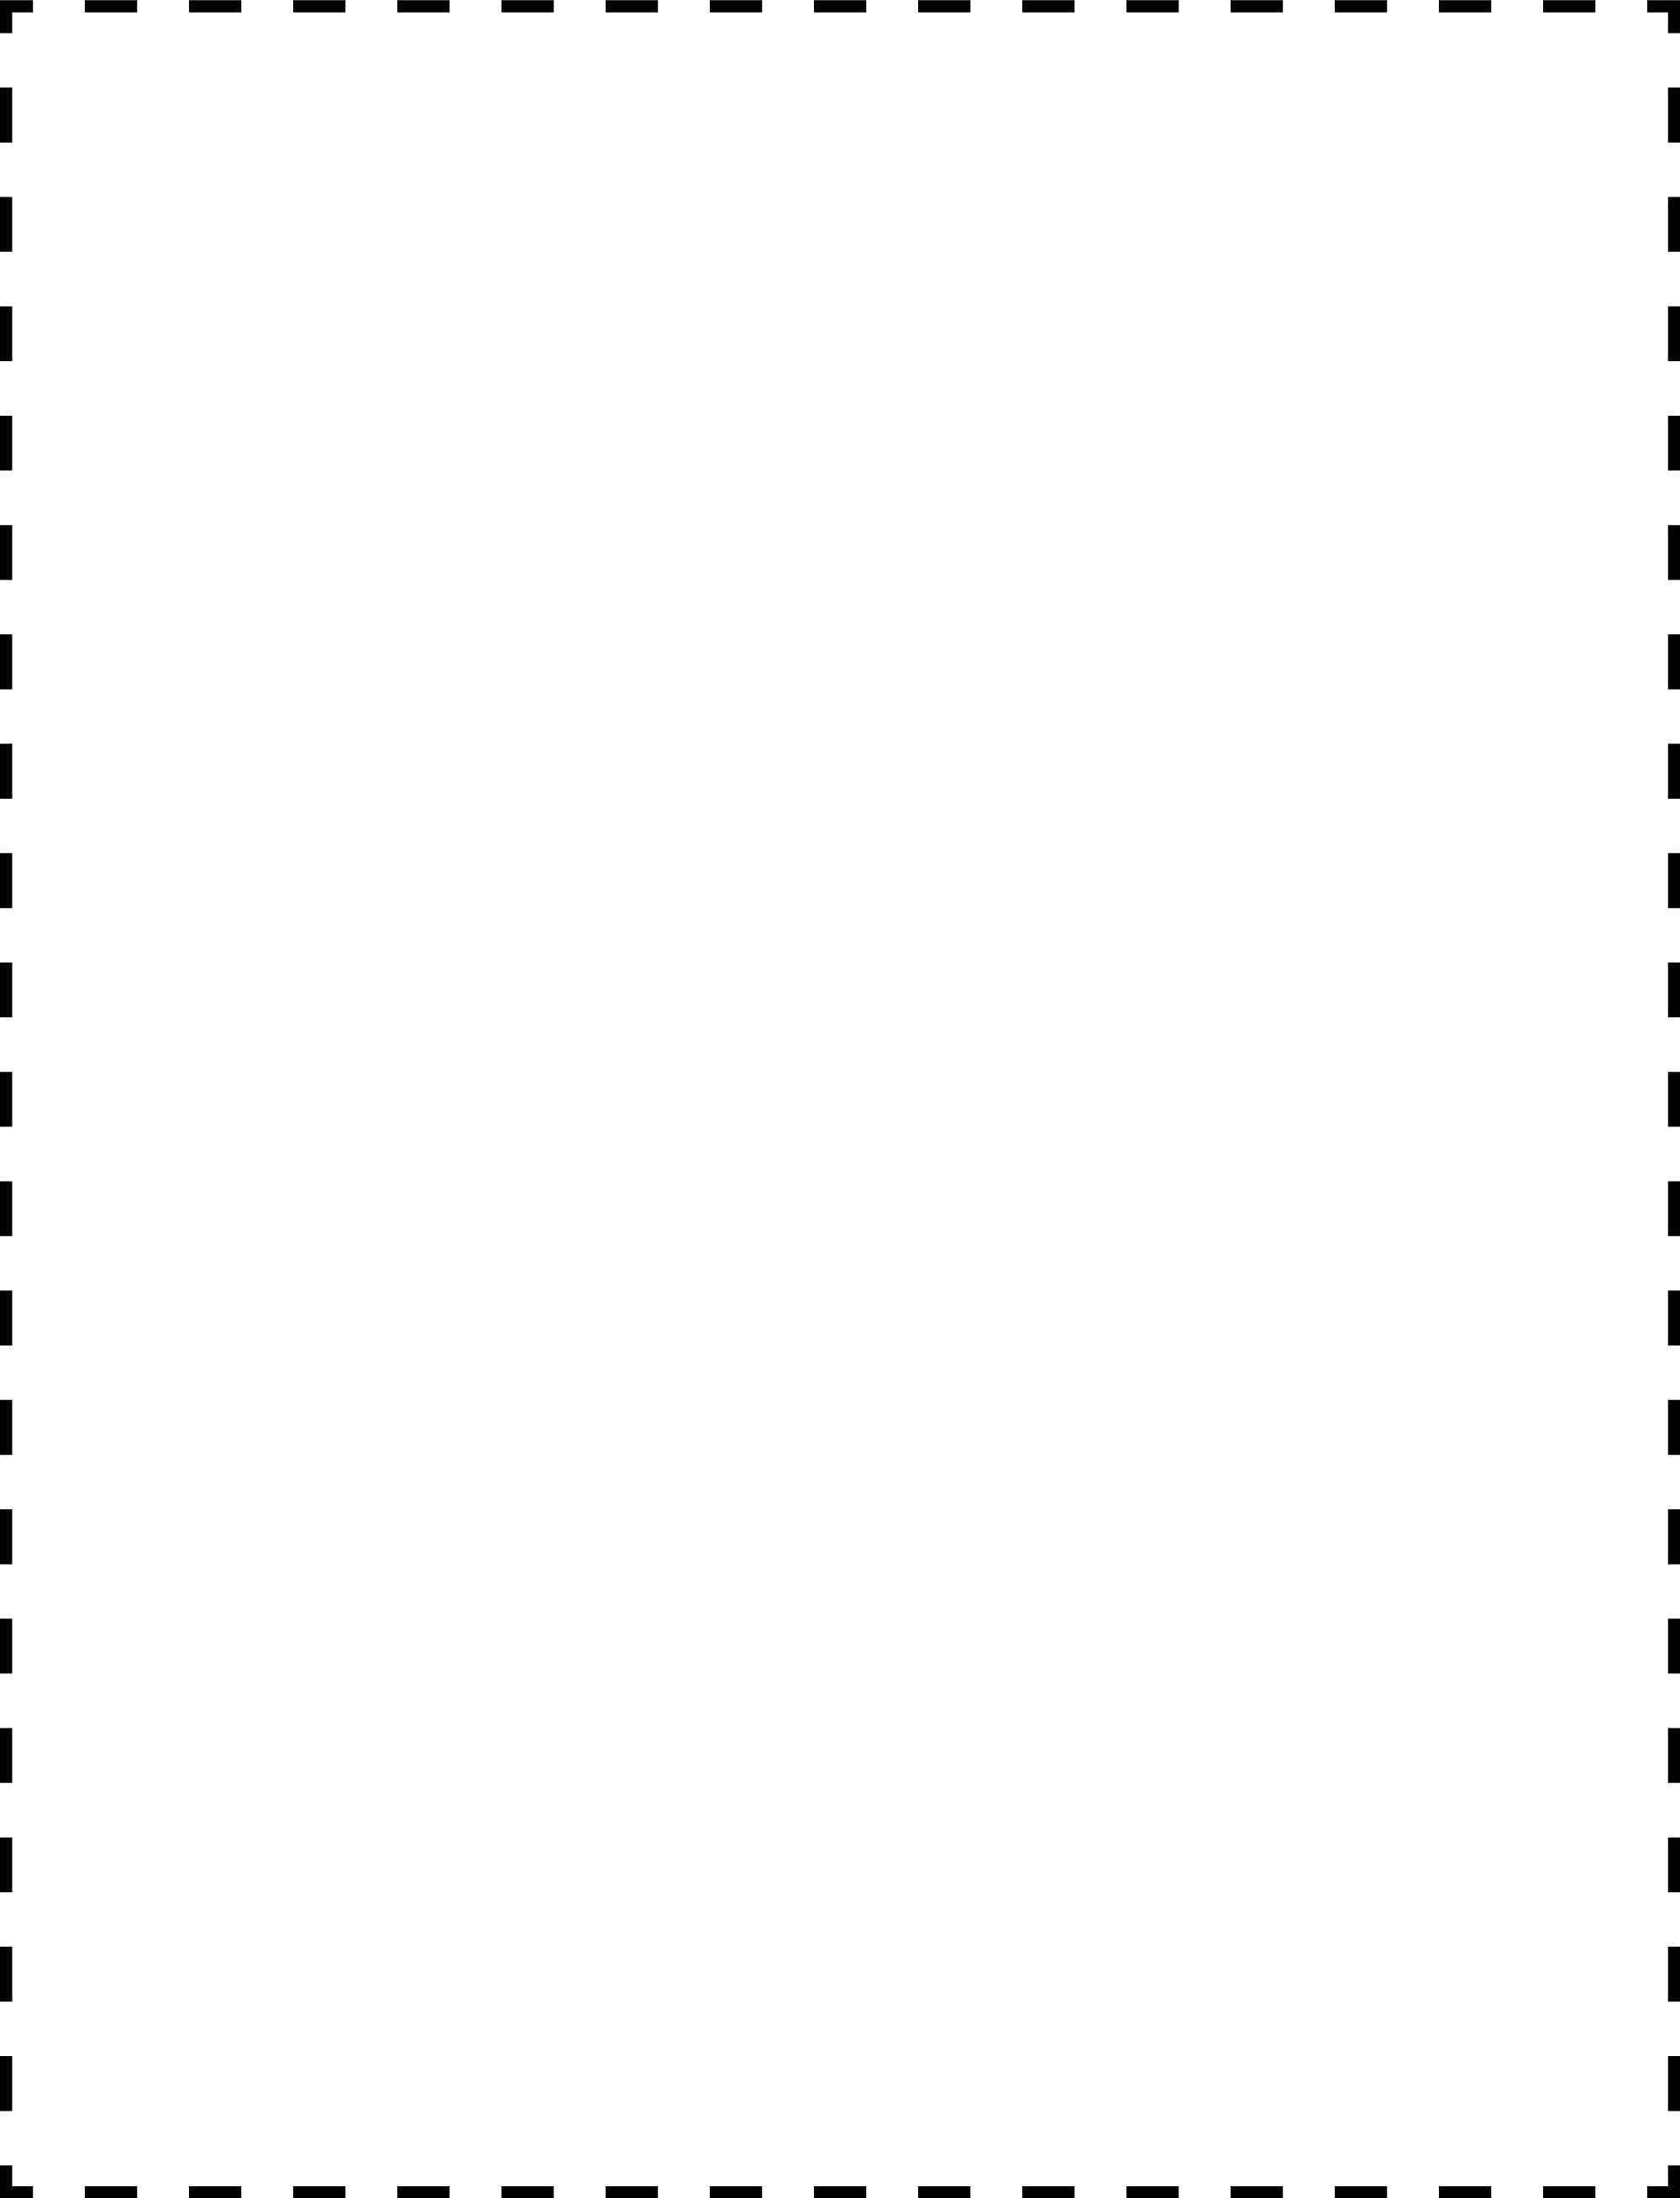 2037-coupon-outline-4x5-k.png